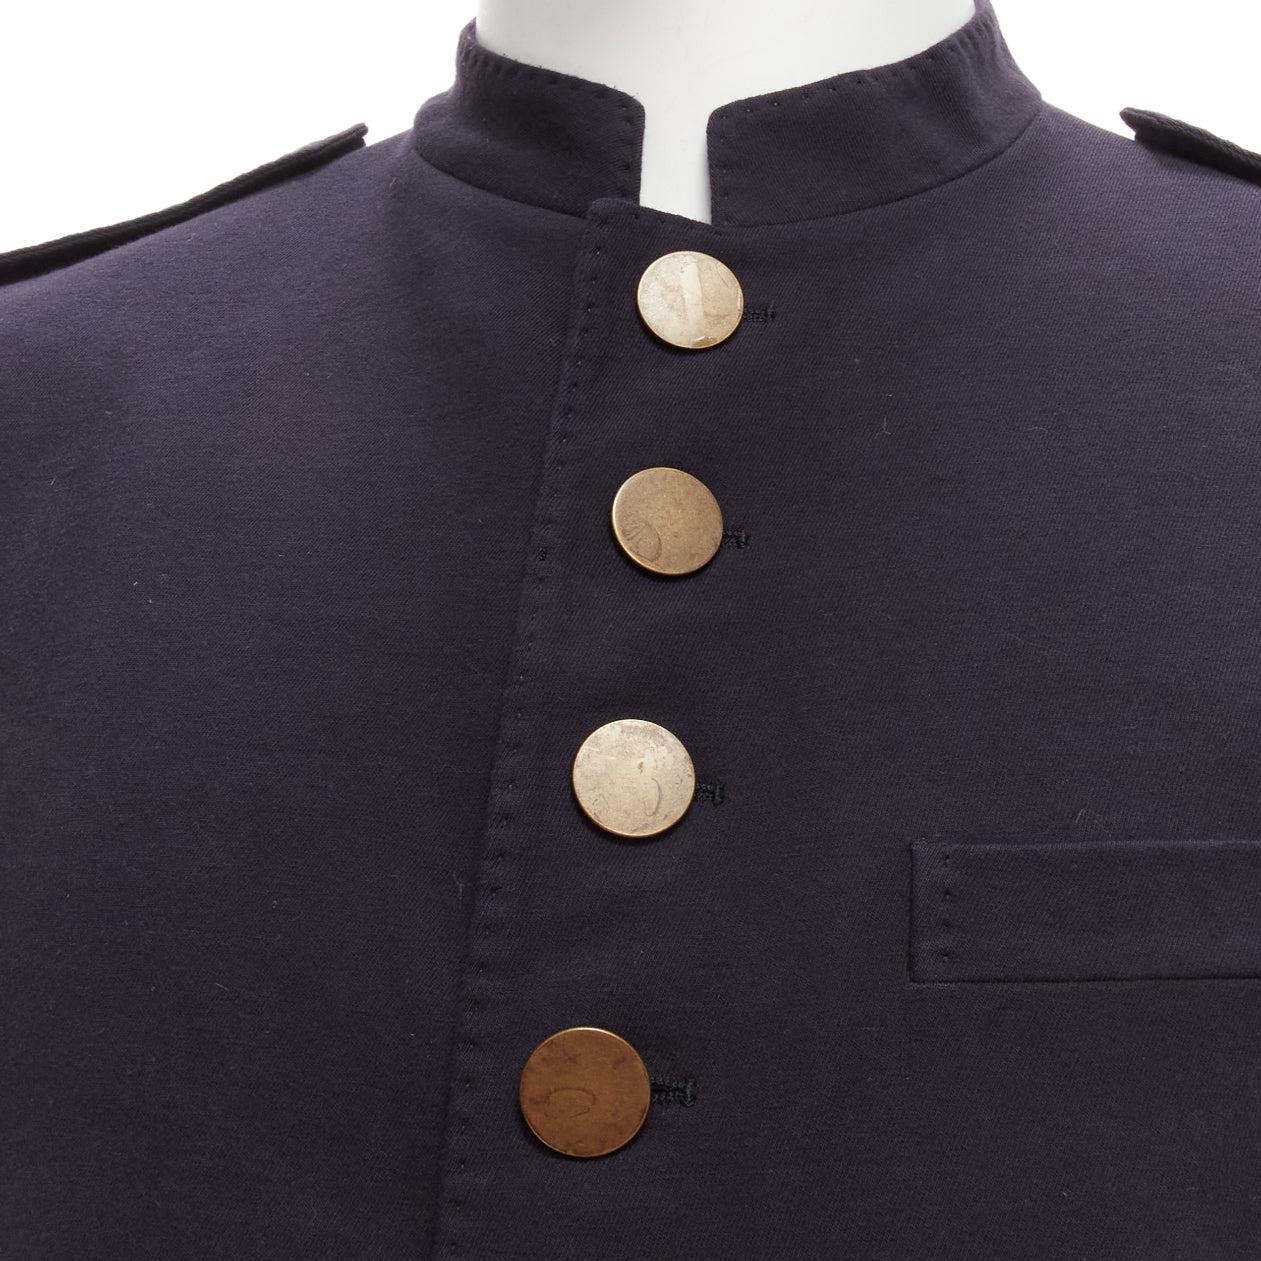 LANVIN navy cotton blend bronze buttons military officer jacket IT48 M
Reference: YNWG/A00181
Brand: Lanvin
Designer: Alber Elbaz
Material: Cotton, Blend
Color: Navy
Pattern: Solid
Closure: Button
Lining: Navy Fabric
Extra Details: Lightly padded